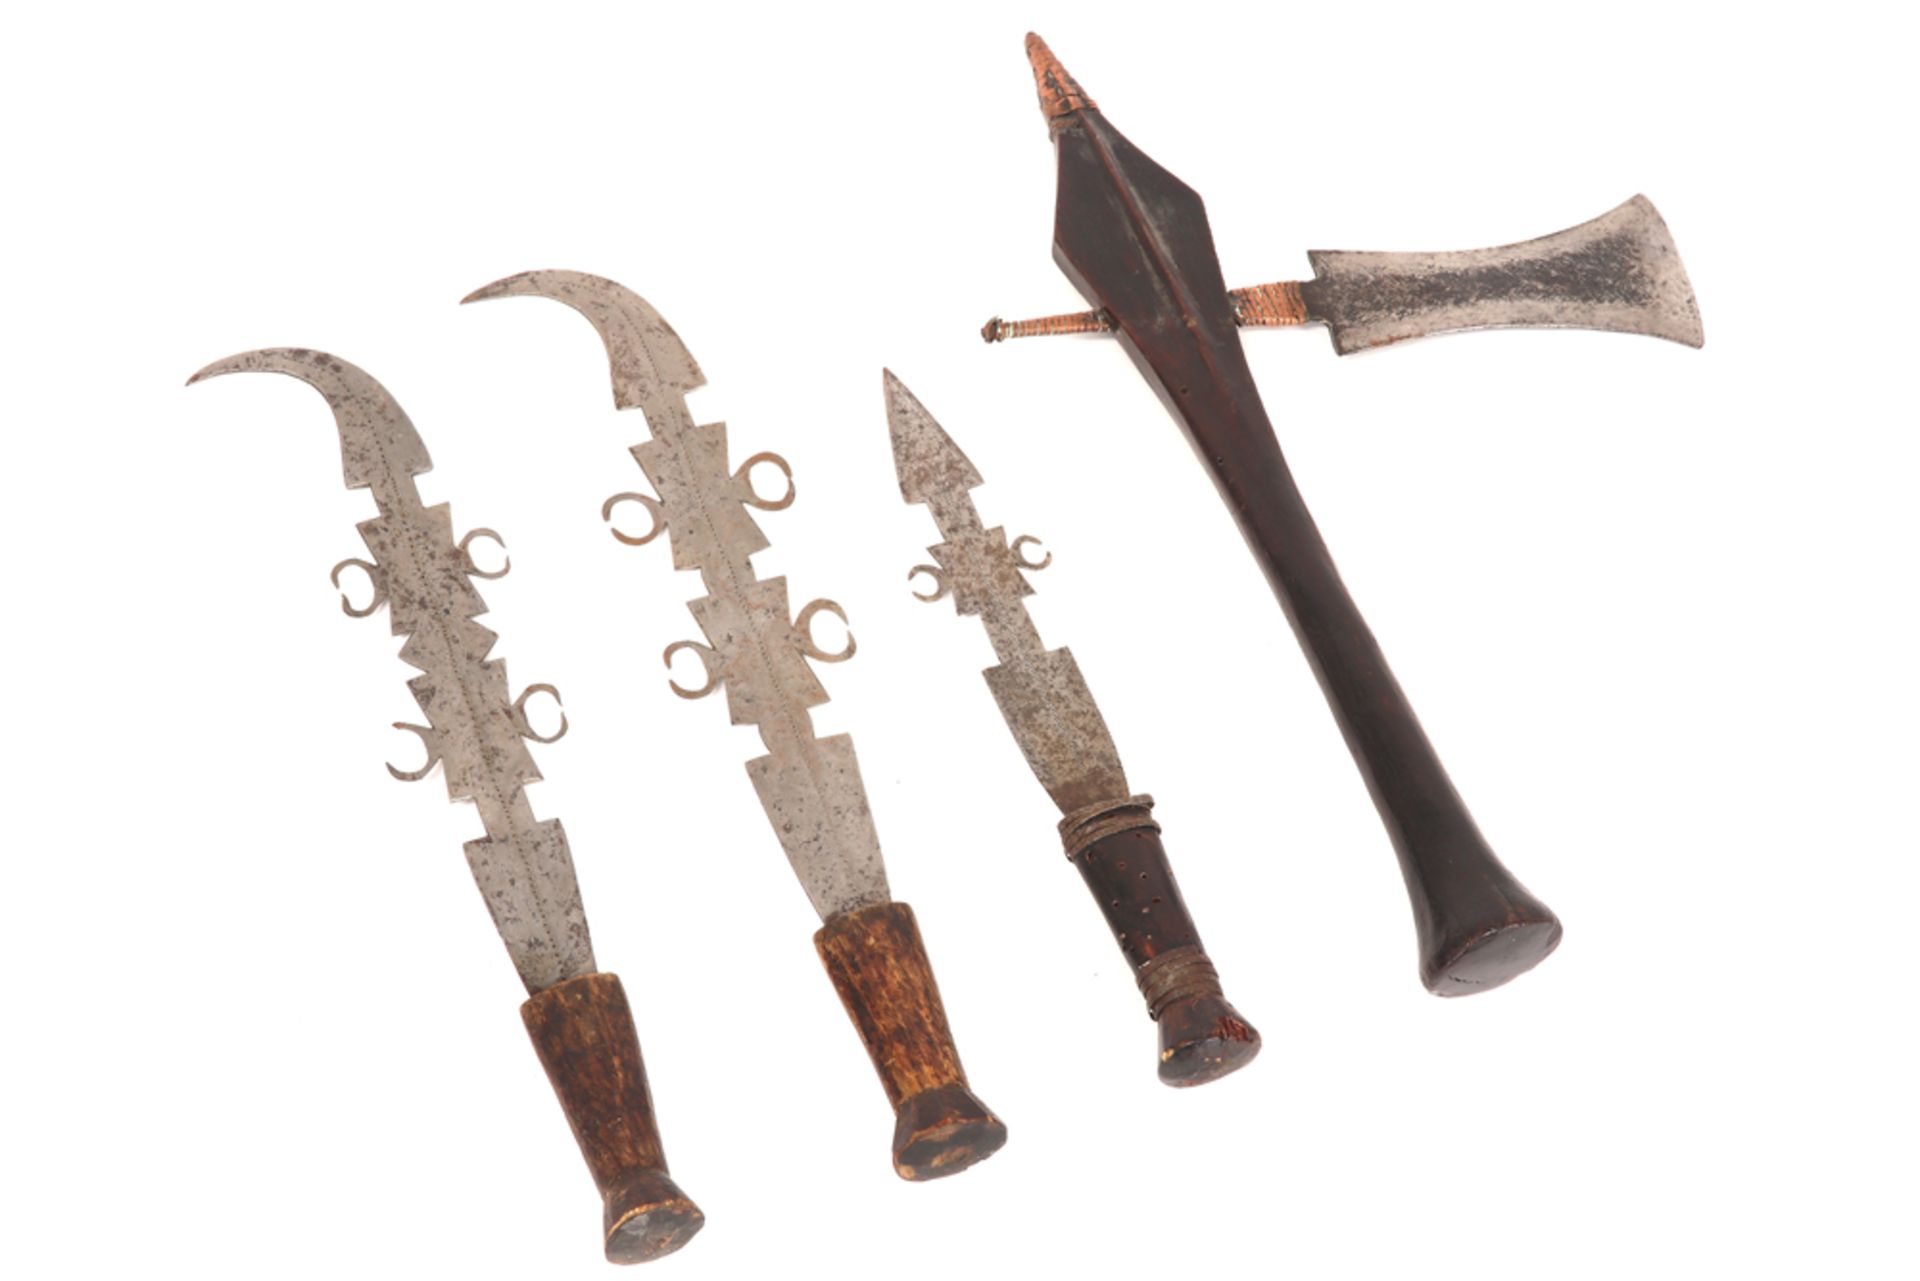 four African prestige knives : - three Congolese of the Ekonda/Kundu - one from the region of Lake